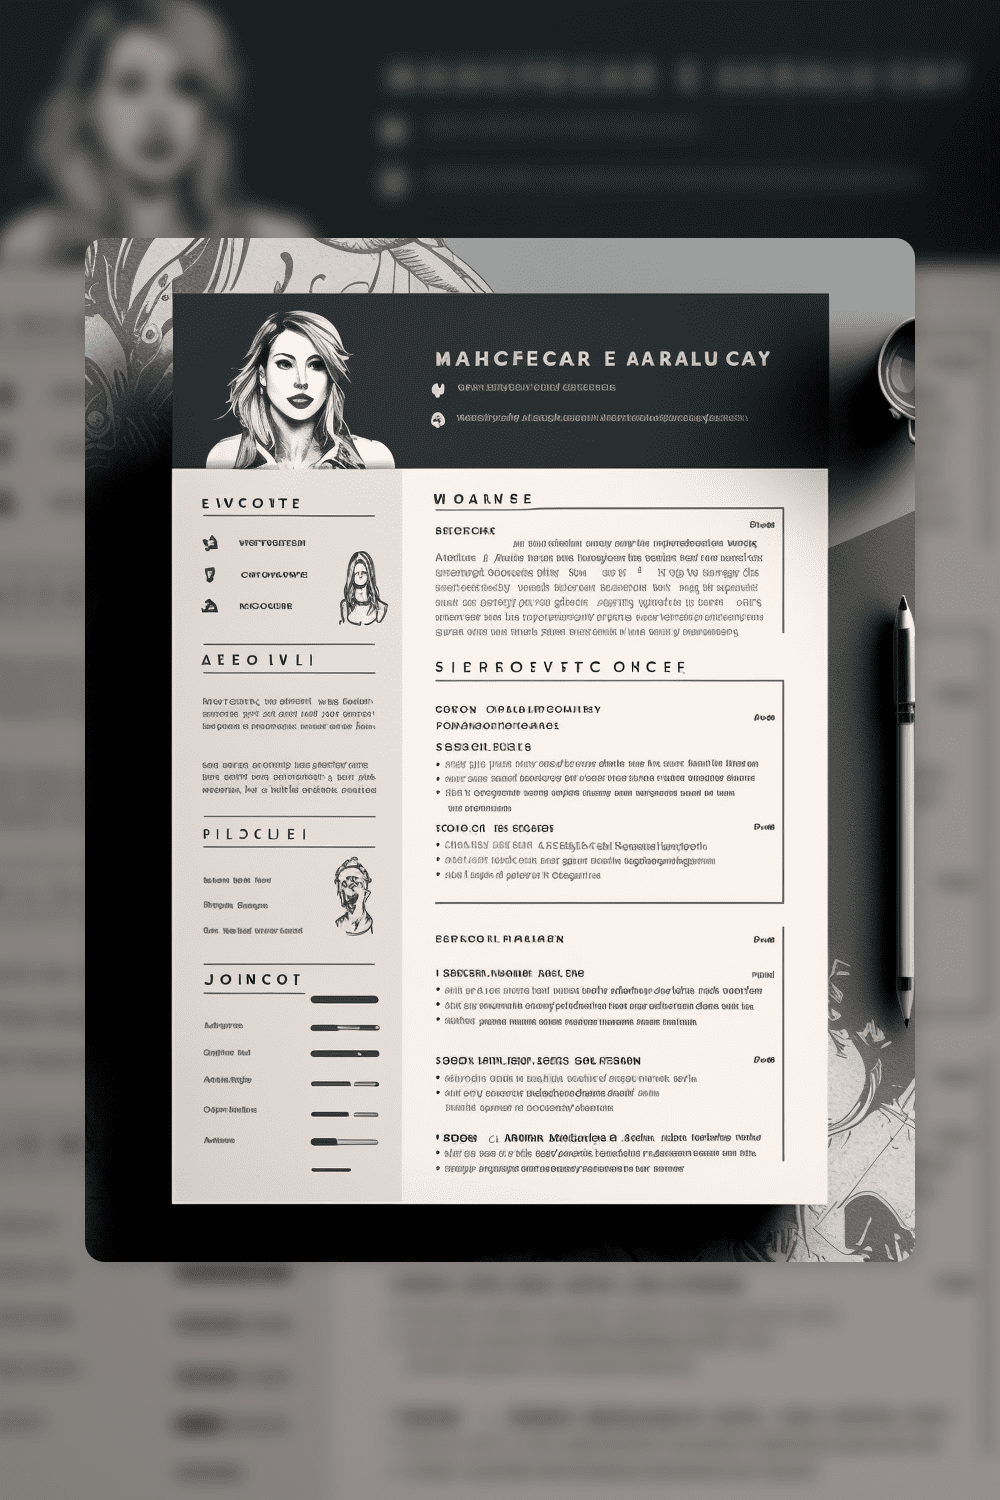 Image of a professionally made resume for a girl.